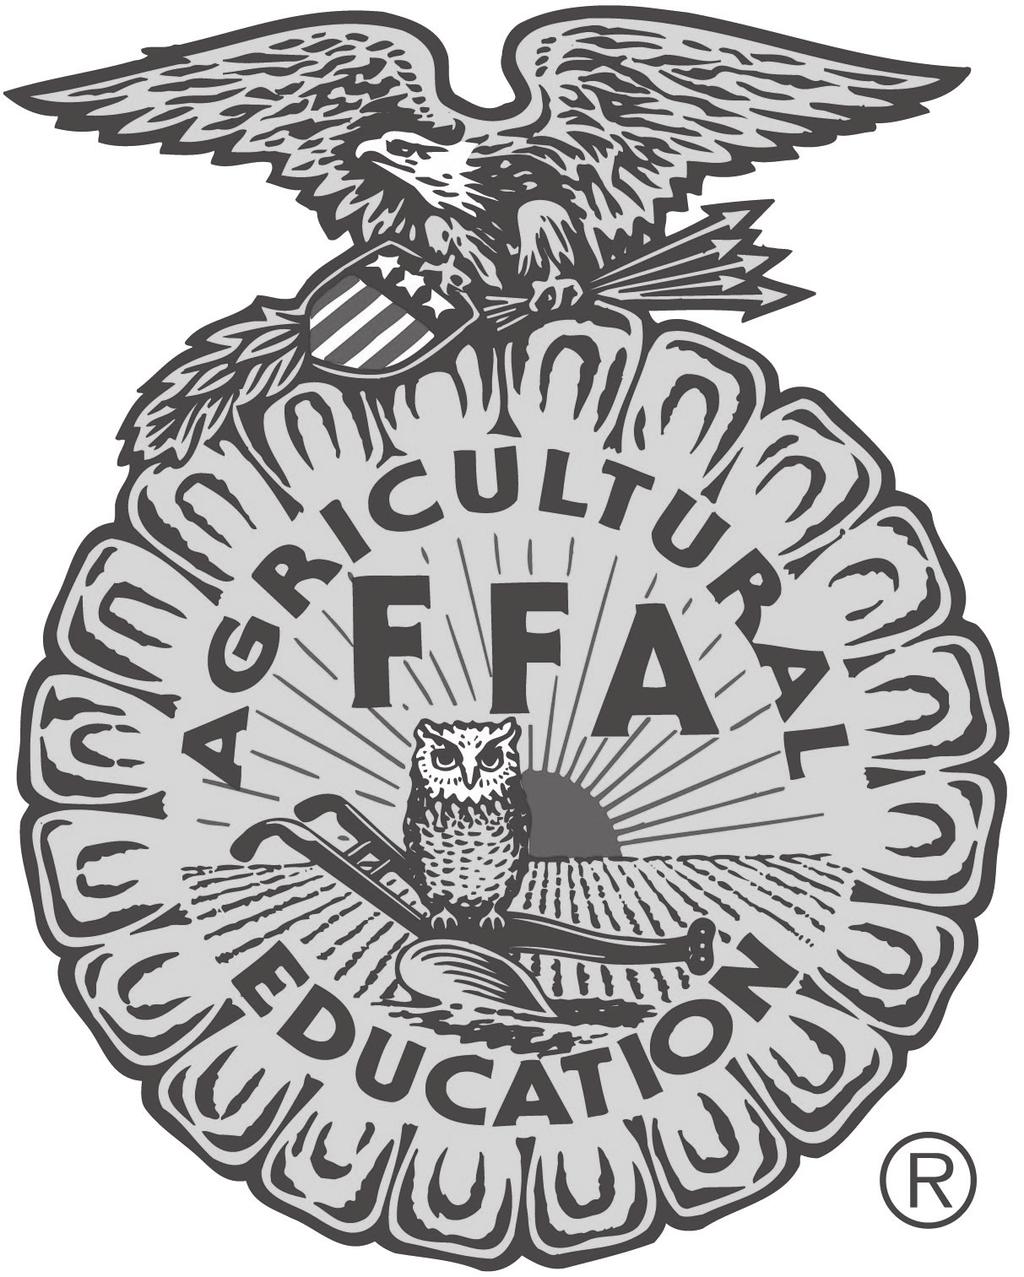 FFA NEWS By McKayla Hoskin, Reporter Hello everyone! October was a busy month for FFA members with leadership camp, judging contests, hog raffle and cider press!